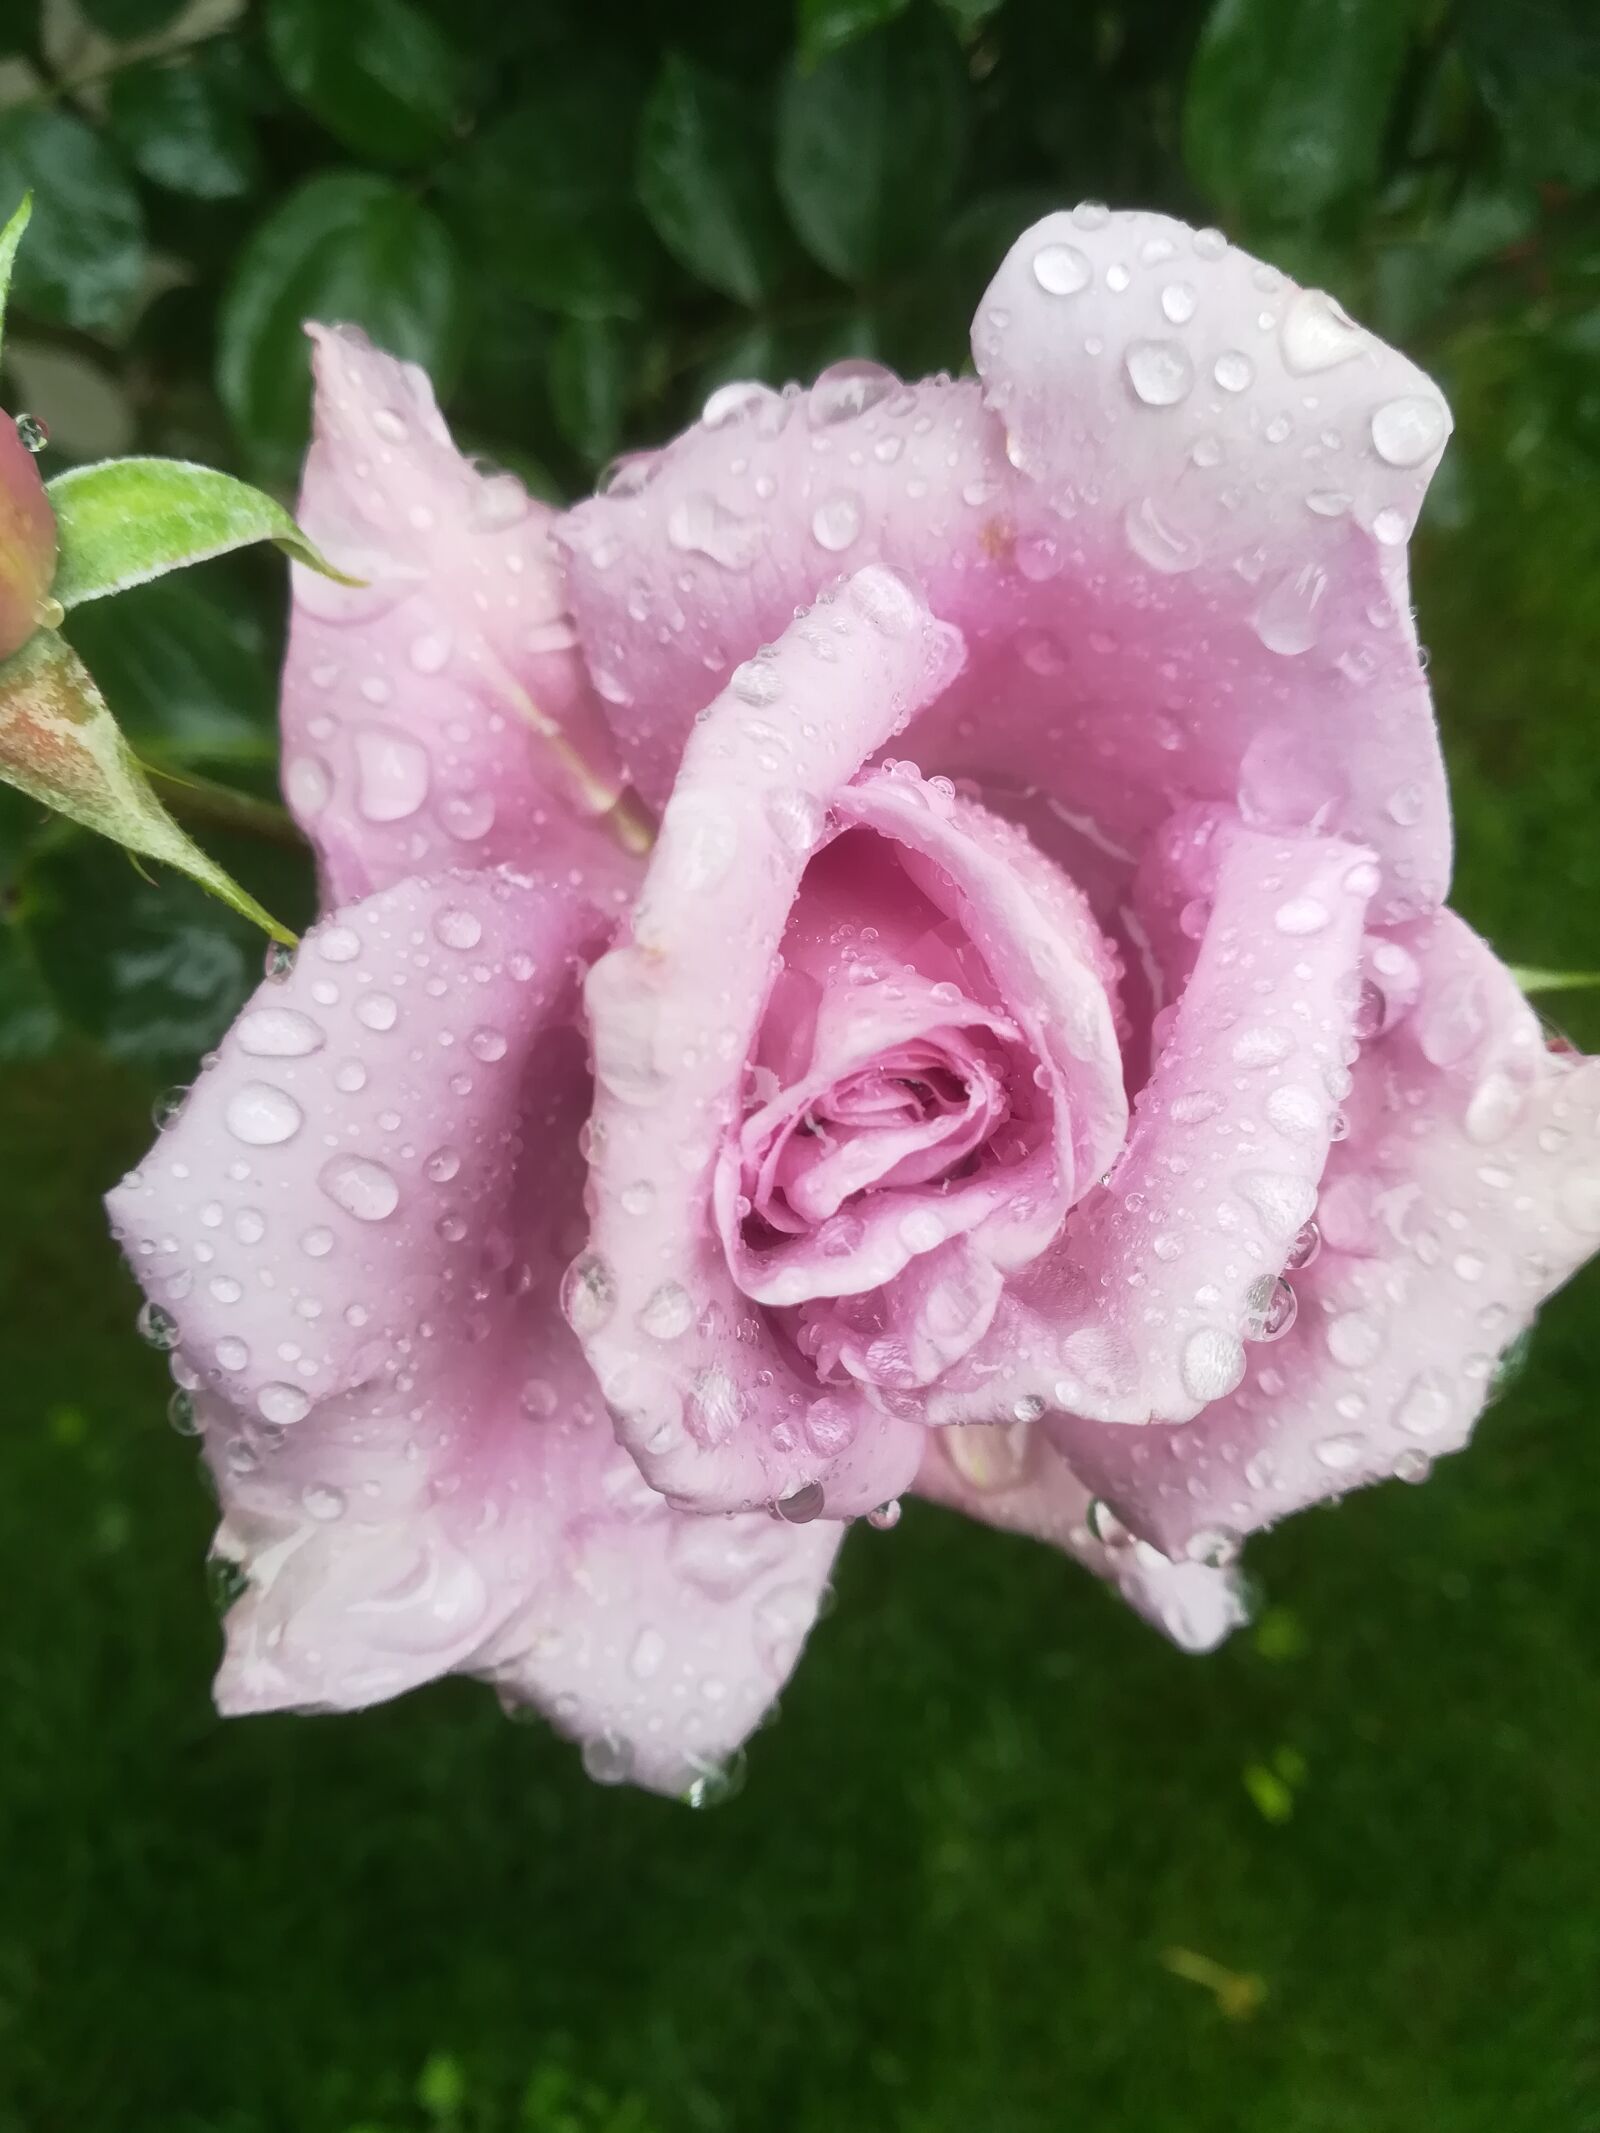 HUAWEI P10 lite sample photo. Rose, purple, color photography